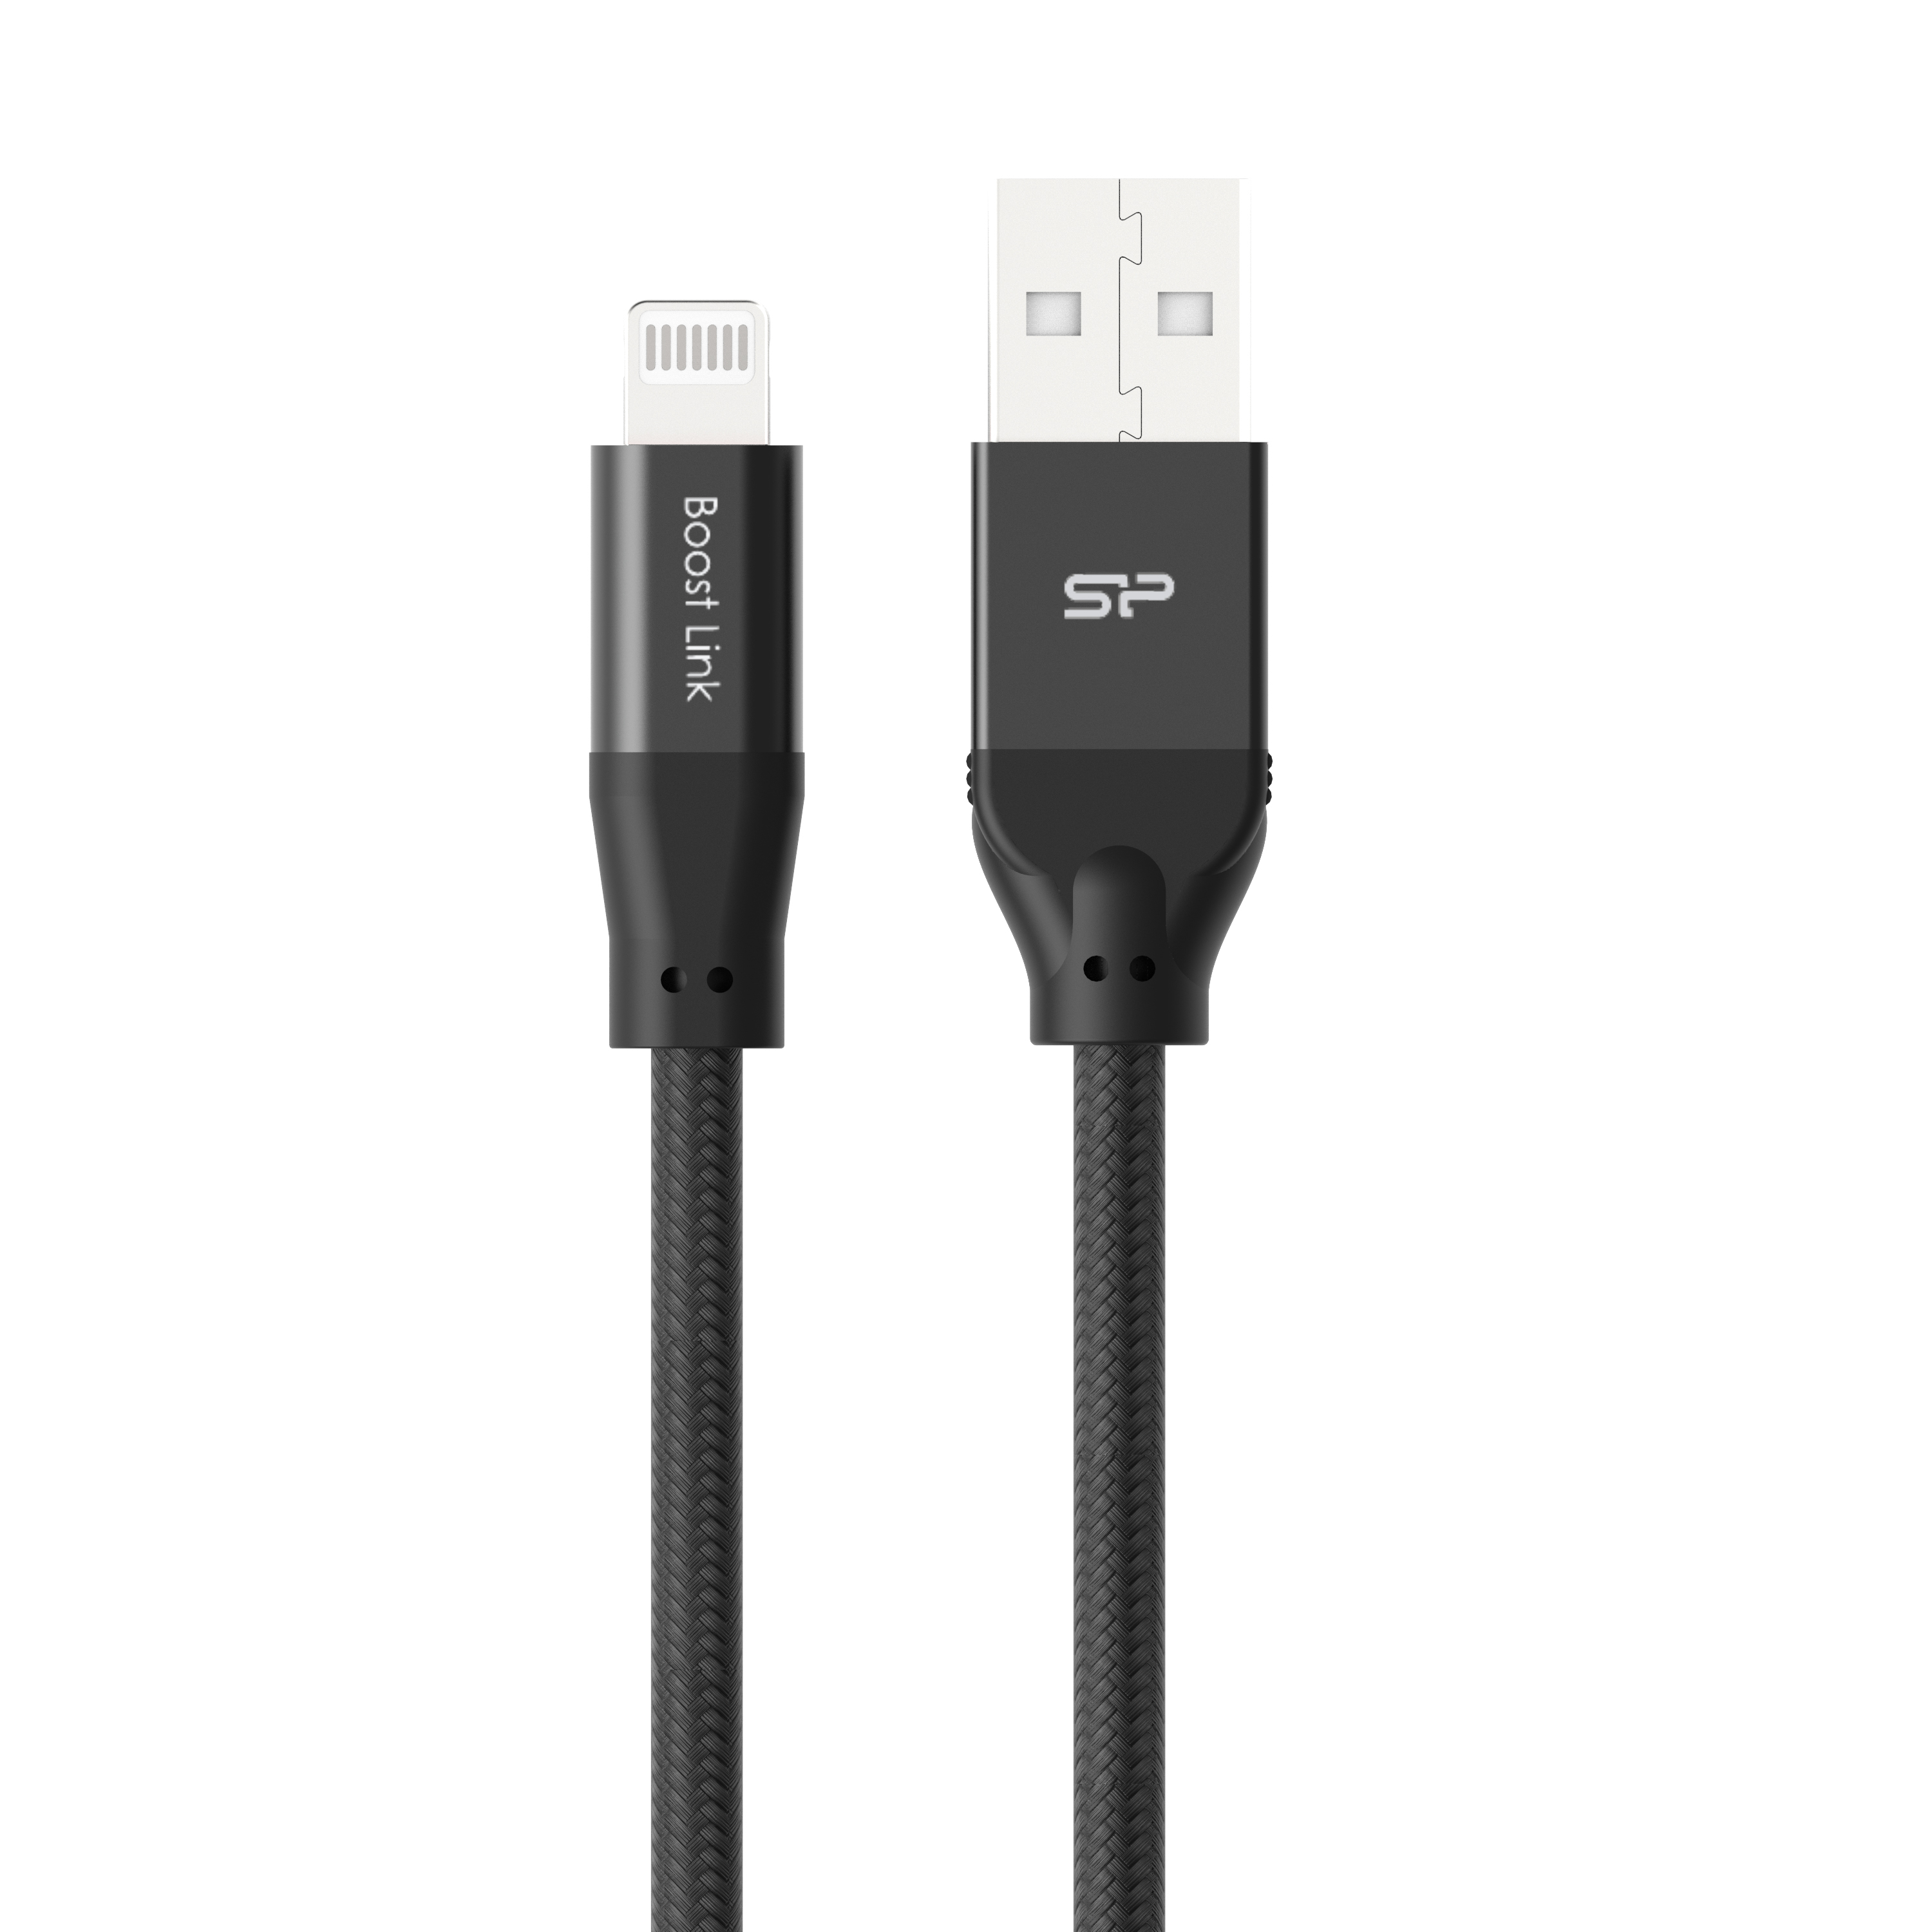 Silicon Power Lightning USB Braided Cable 1m - Black